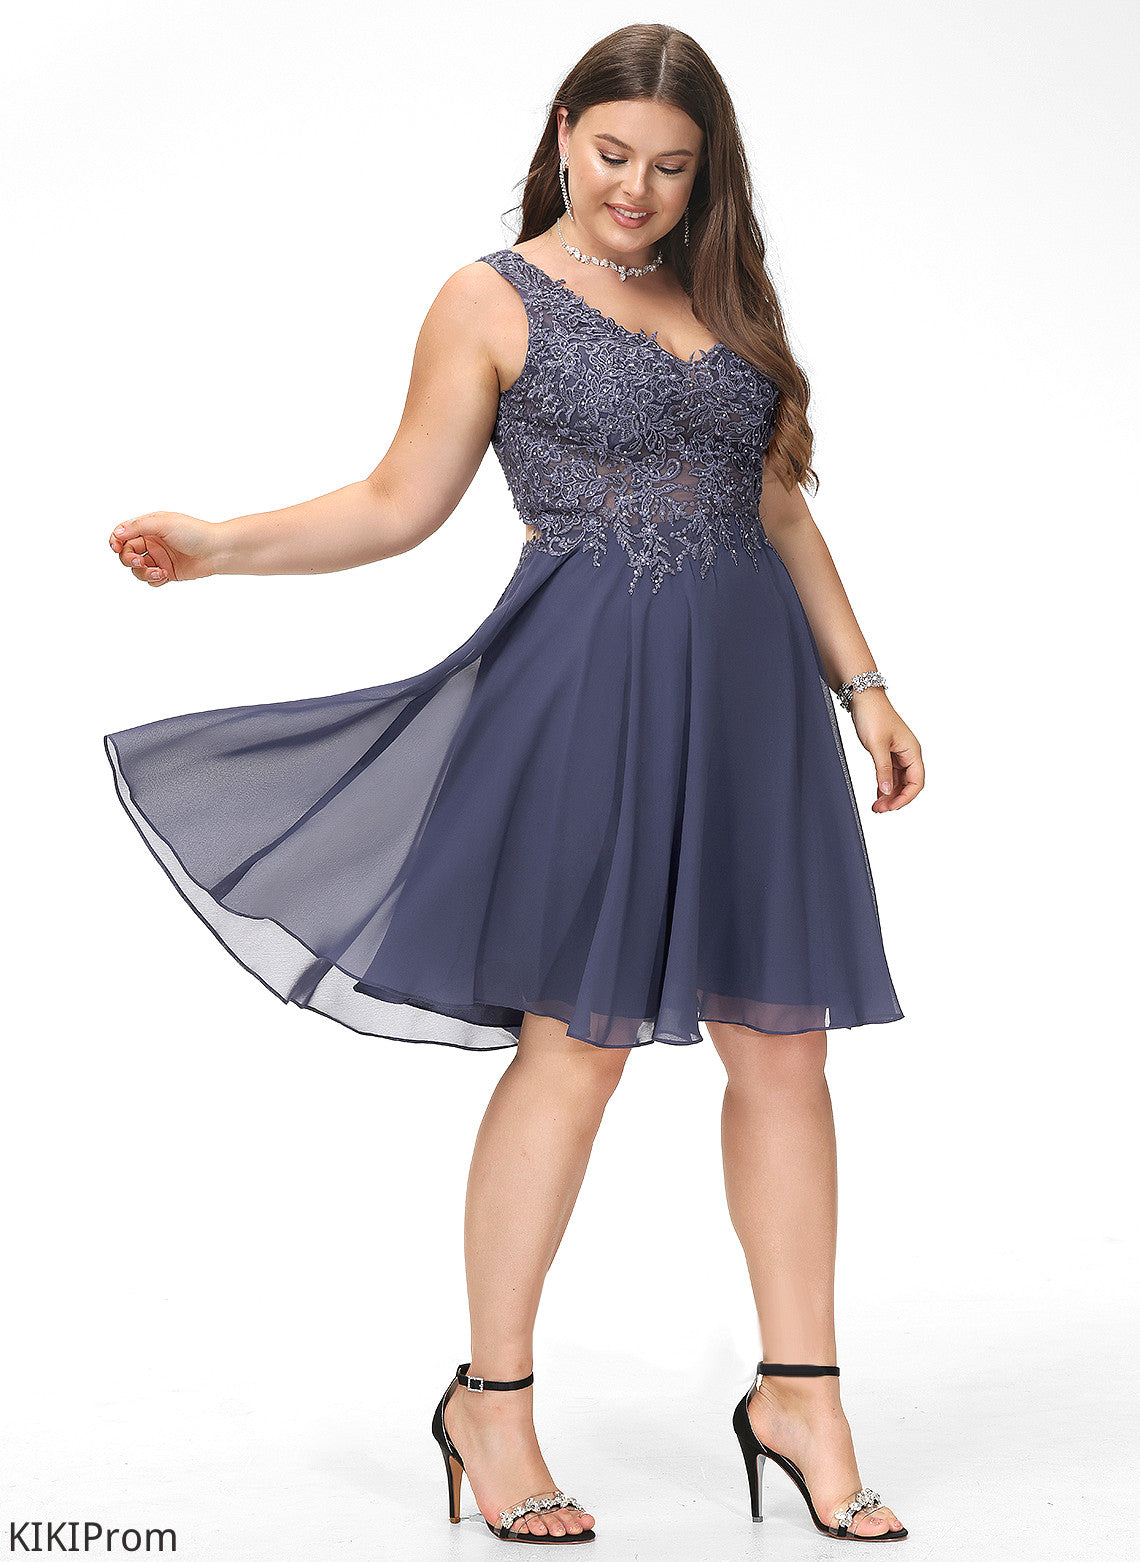 Chiffon Homecoming Dresses A-Line V-neck Homecoming With Beading Knee-Length Lace Dress Kasey